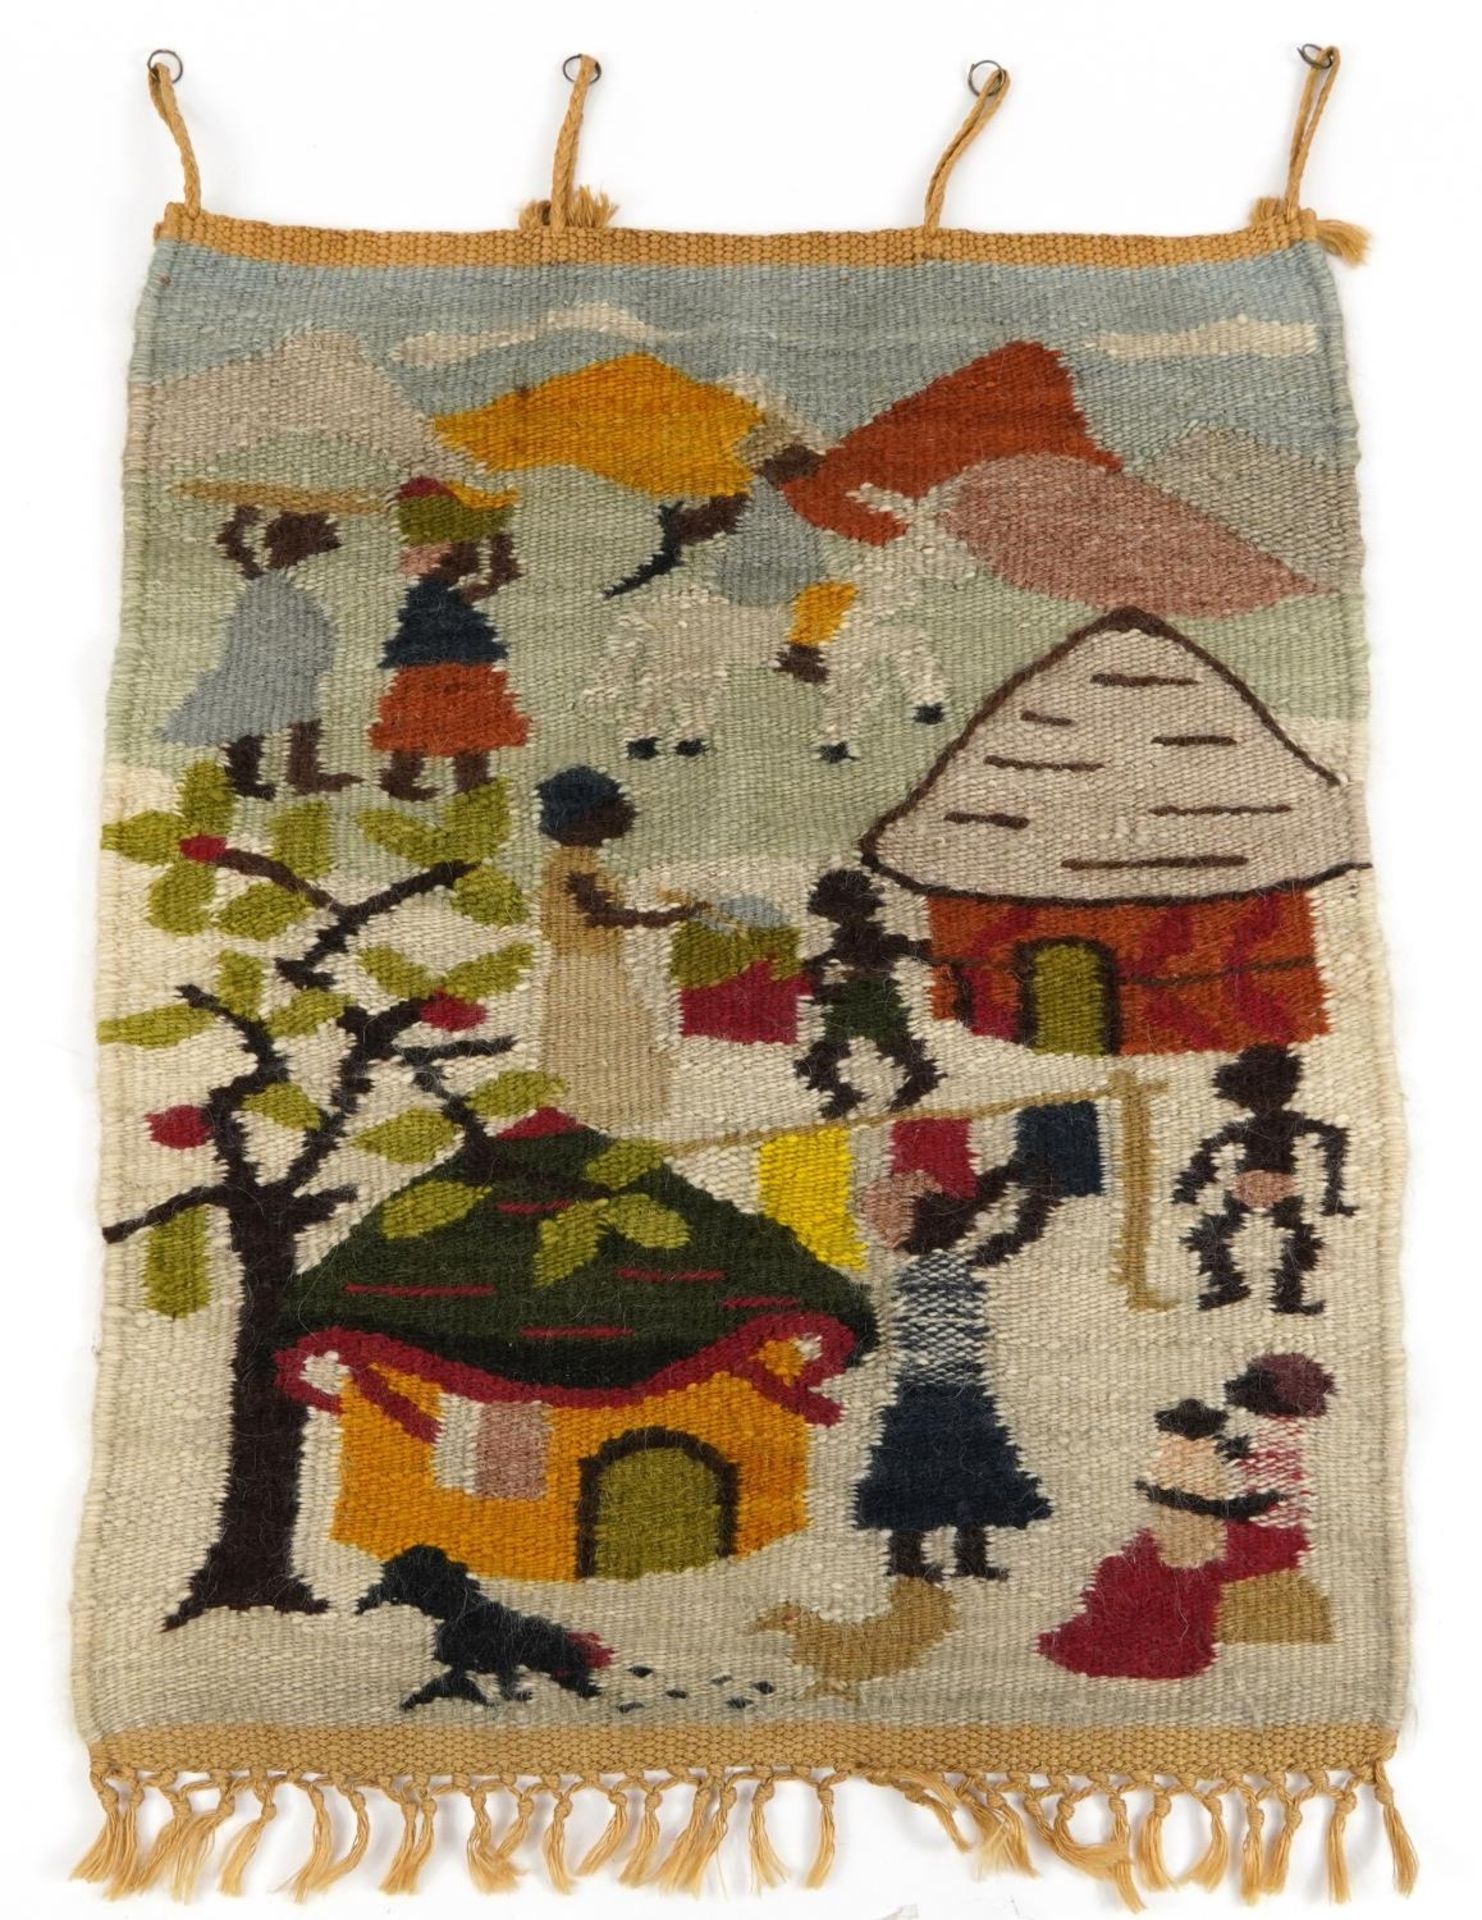 Afro Weavers hand woven wall hanging woven with a figure outside a cottage, 80cm x 62cm For